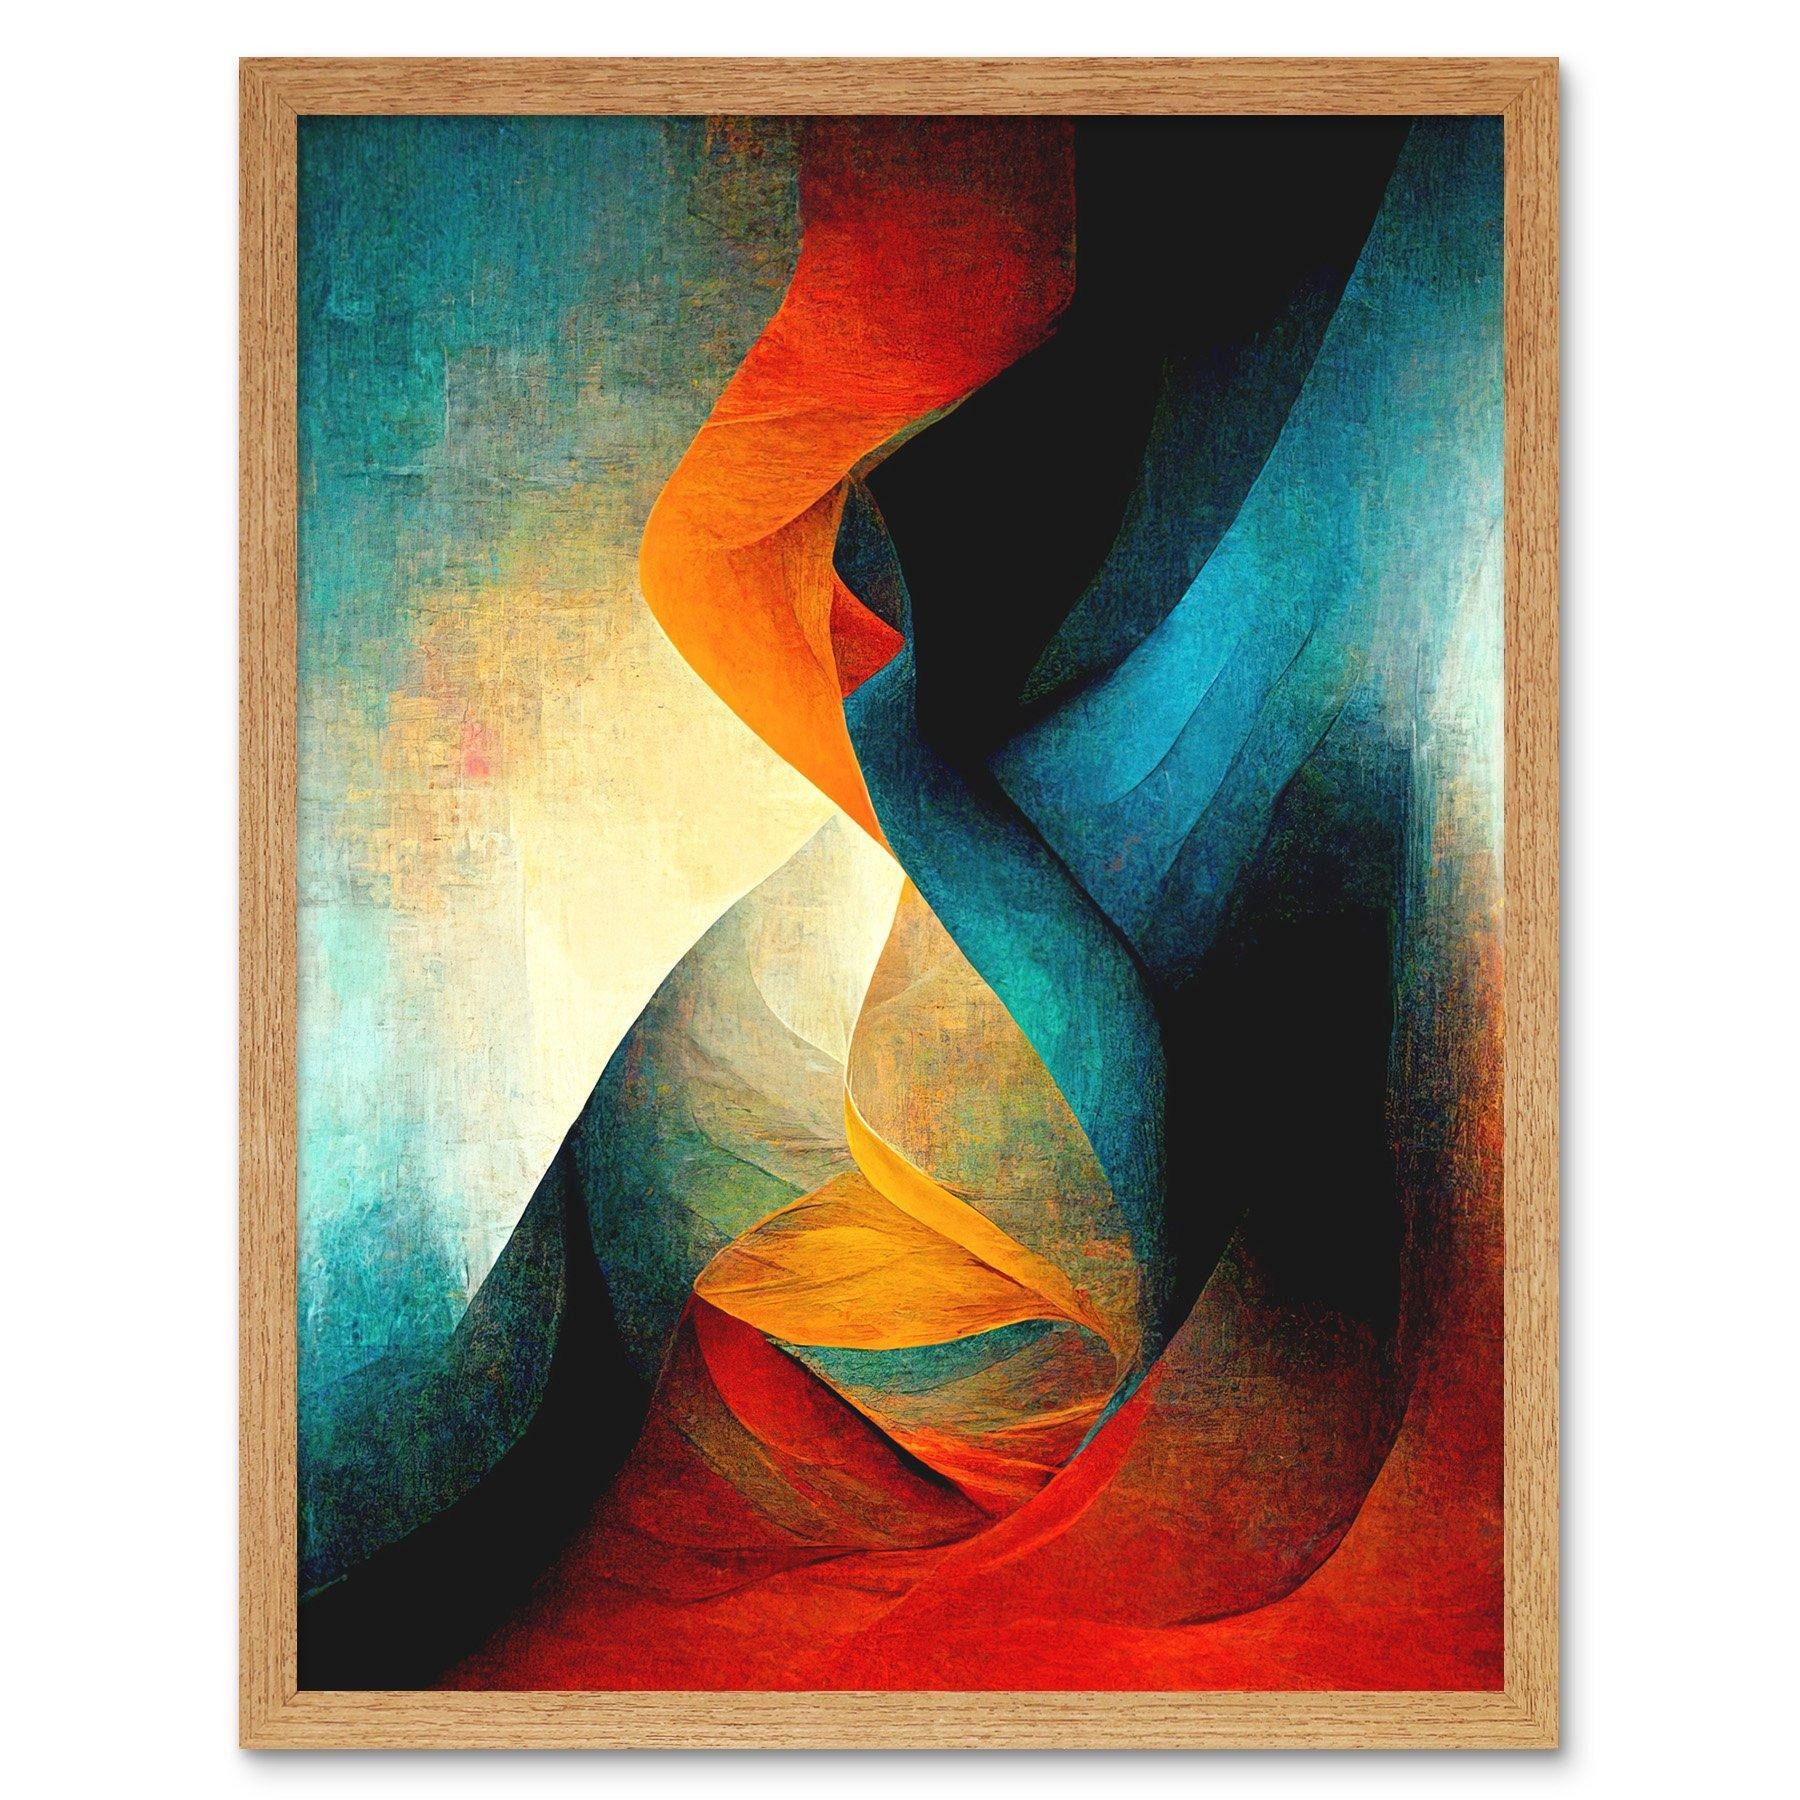 Abstract Modern Acrylic Painting Organic Red Blue Orange Art Print Framed Poster Wall Decor 12x16 inch - image 1